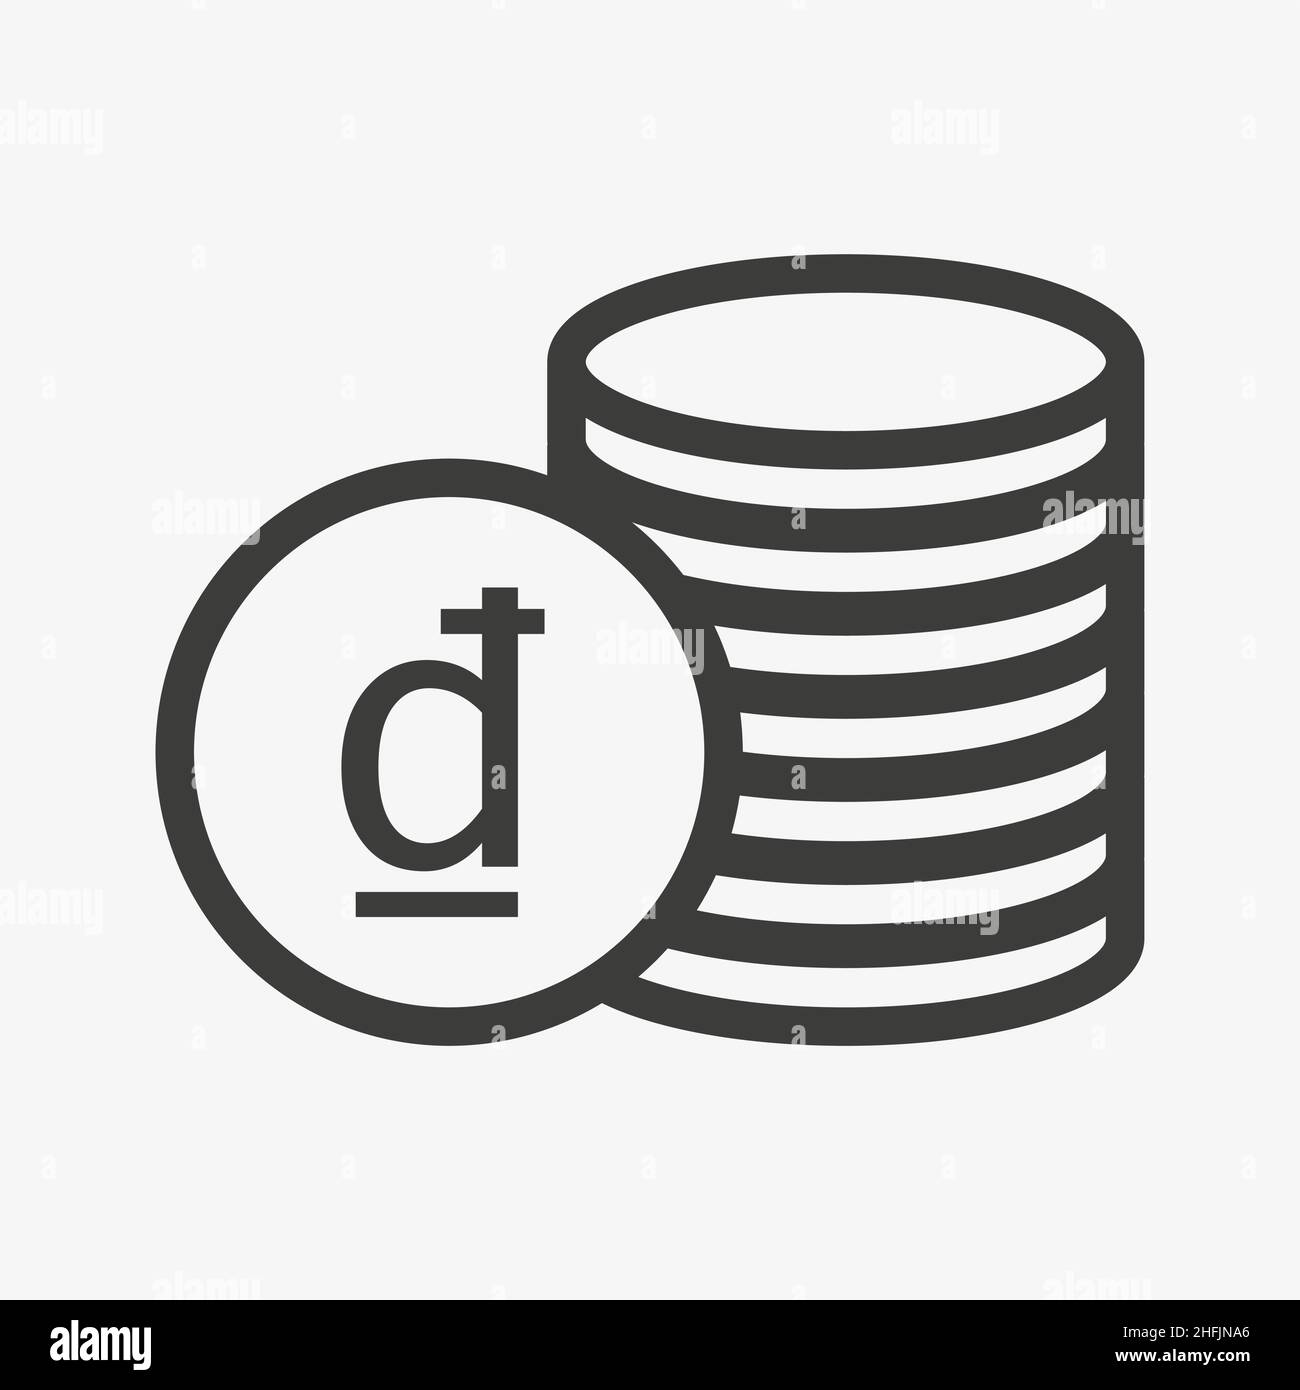 Dong icon. Pile of coins. Vietnamese currency Stock Vector